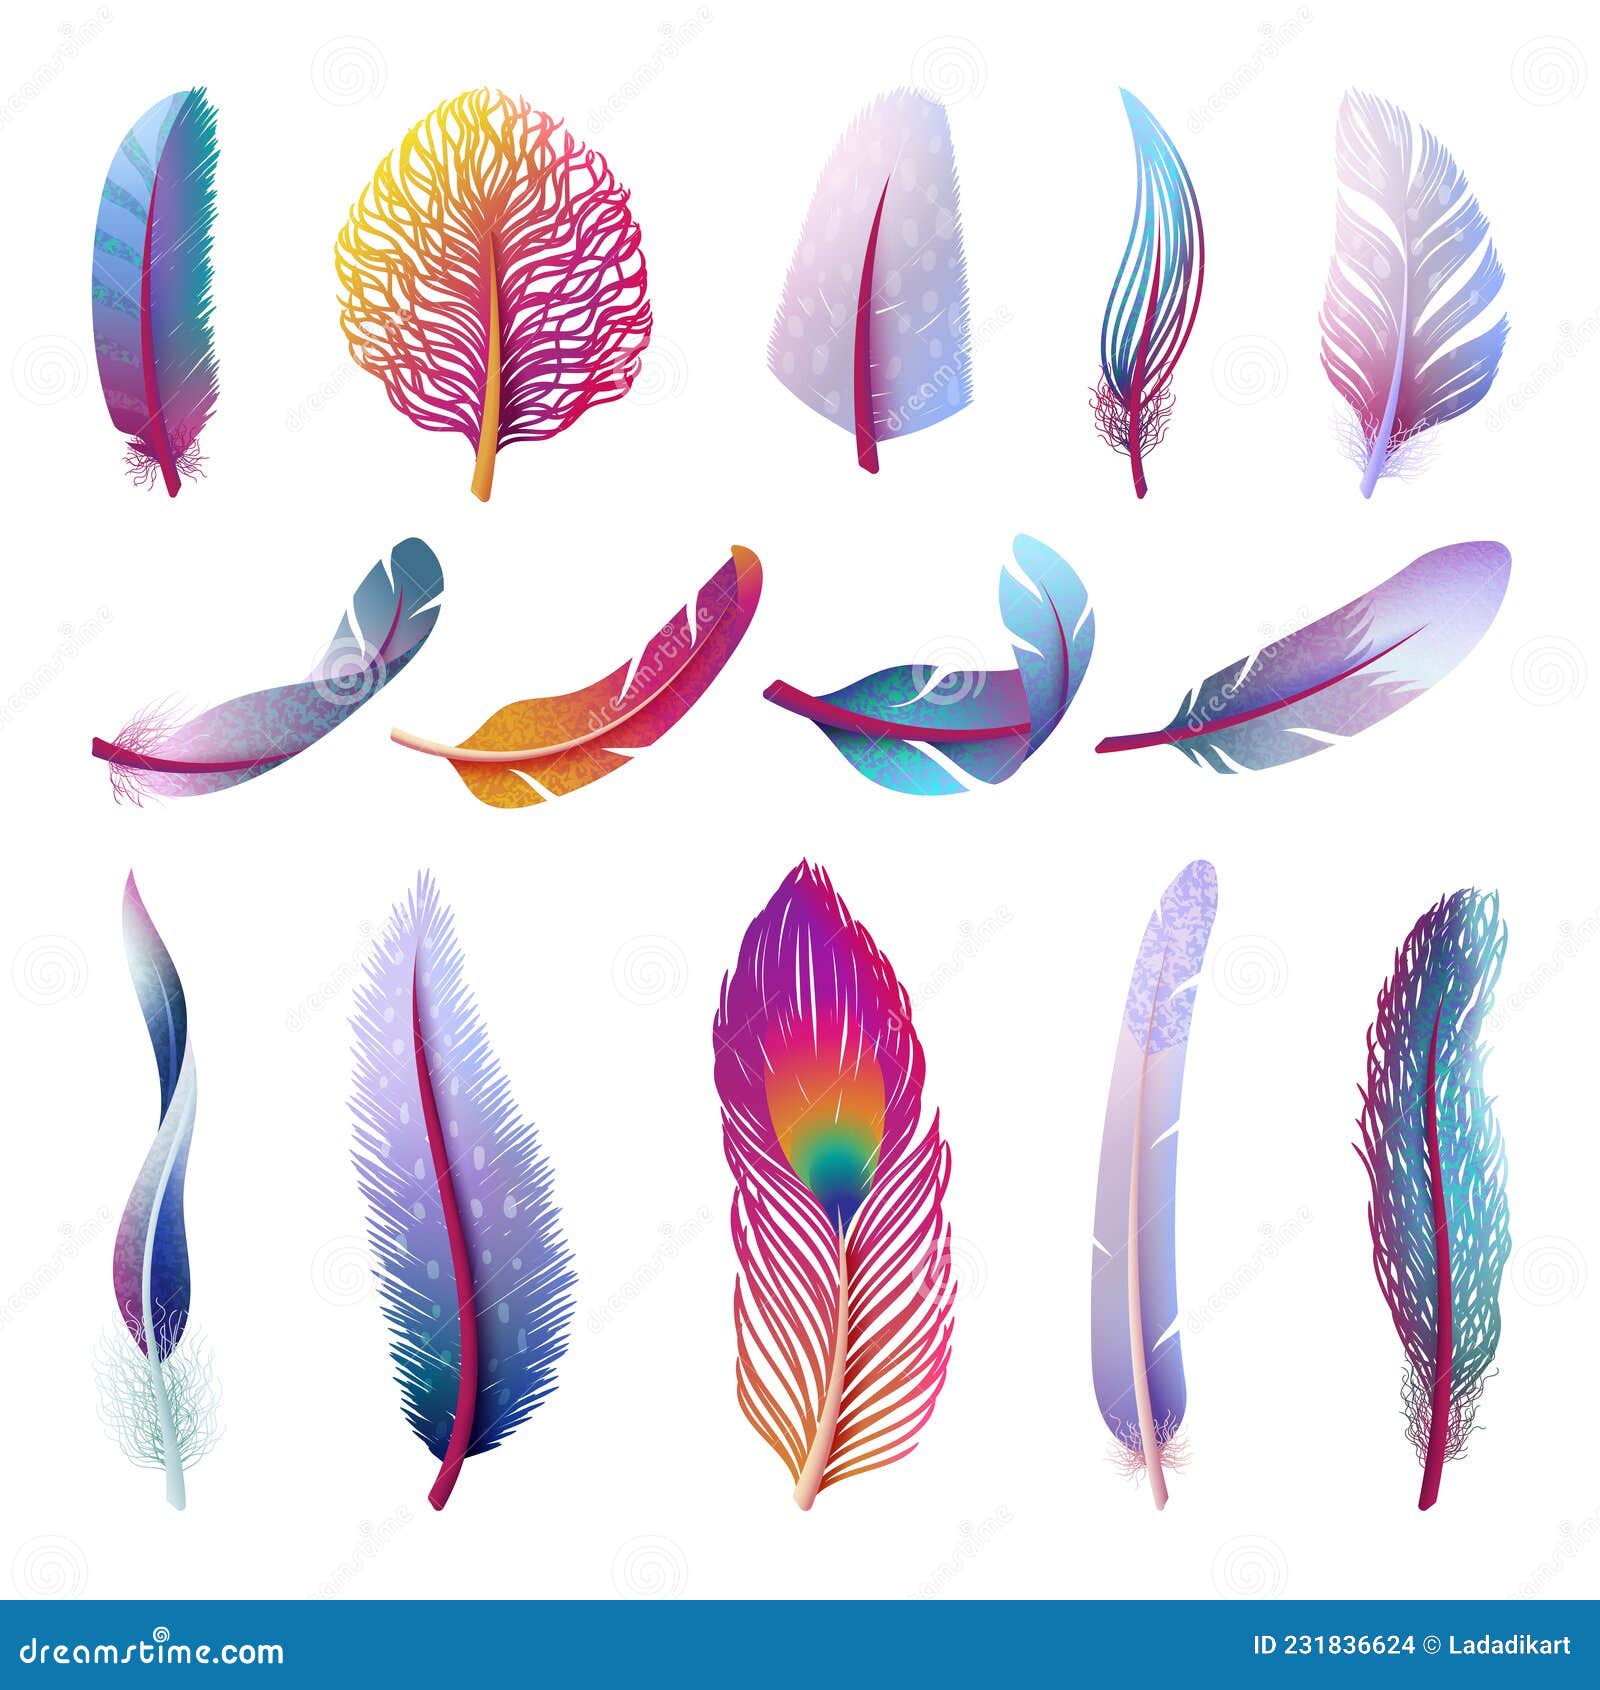 viernes Planta de semillero Competitivo Isolated Feather Collection. Colorful Fantasy Feathers, Peacock Bird Tail  Element Stock Vector - Illustration of icon, design: 231836624